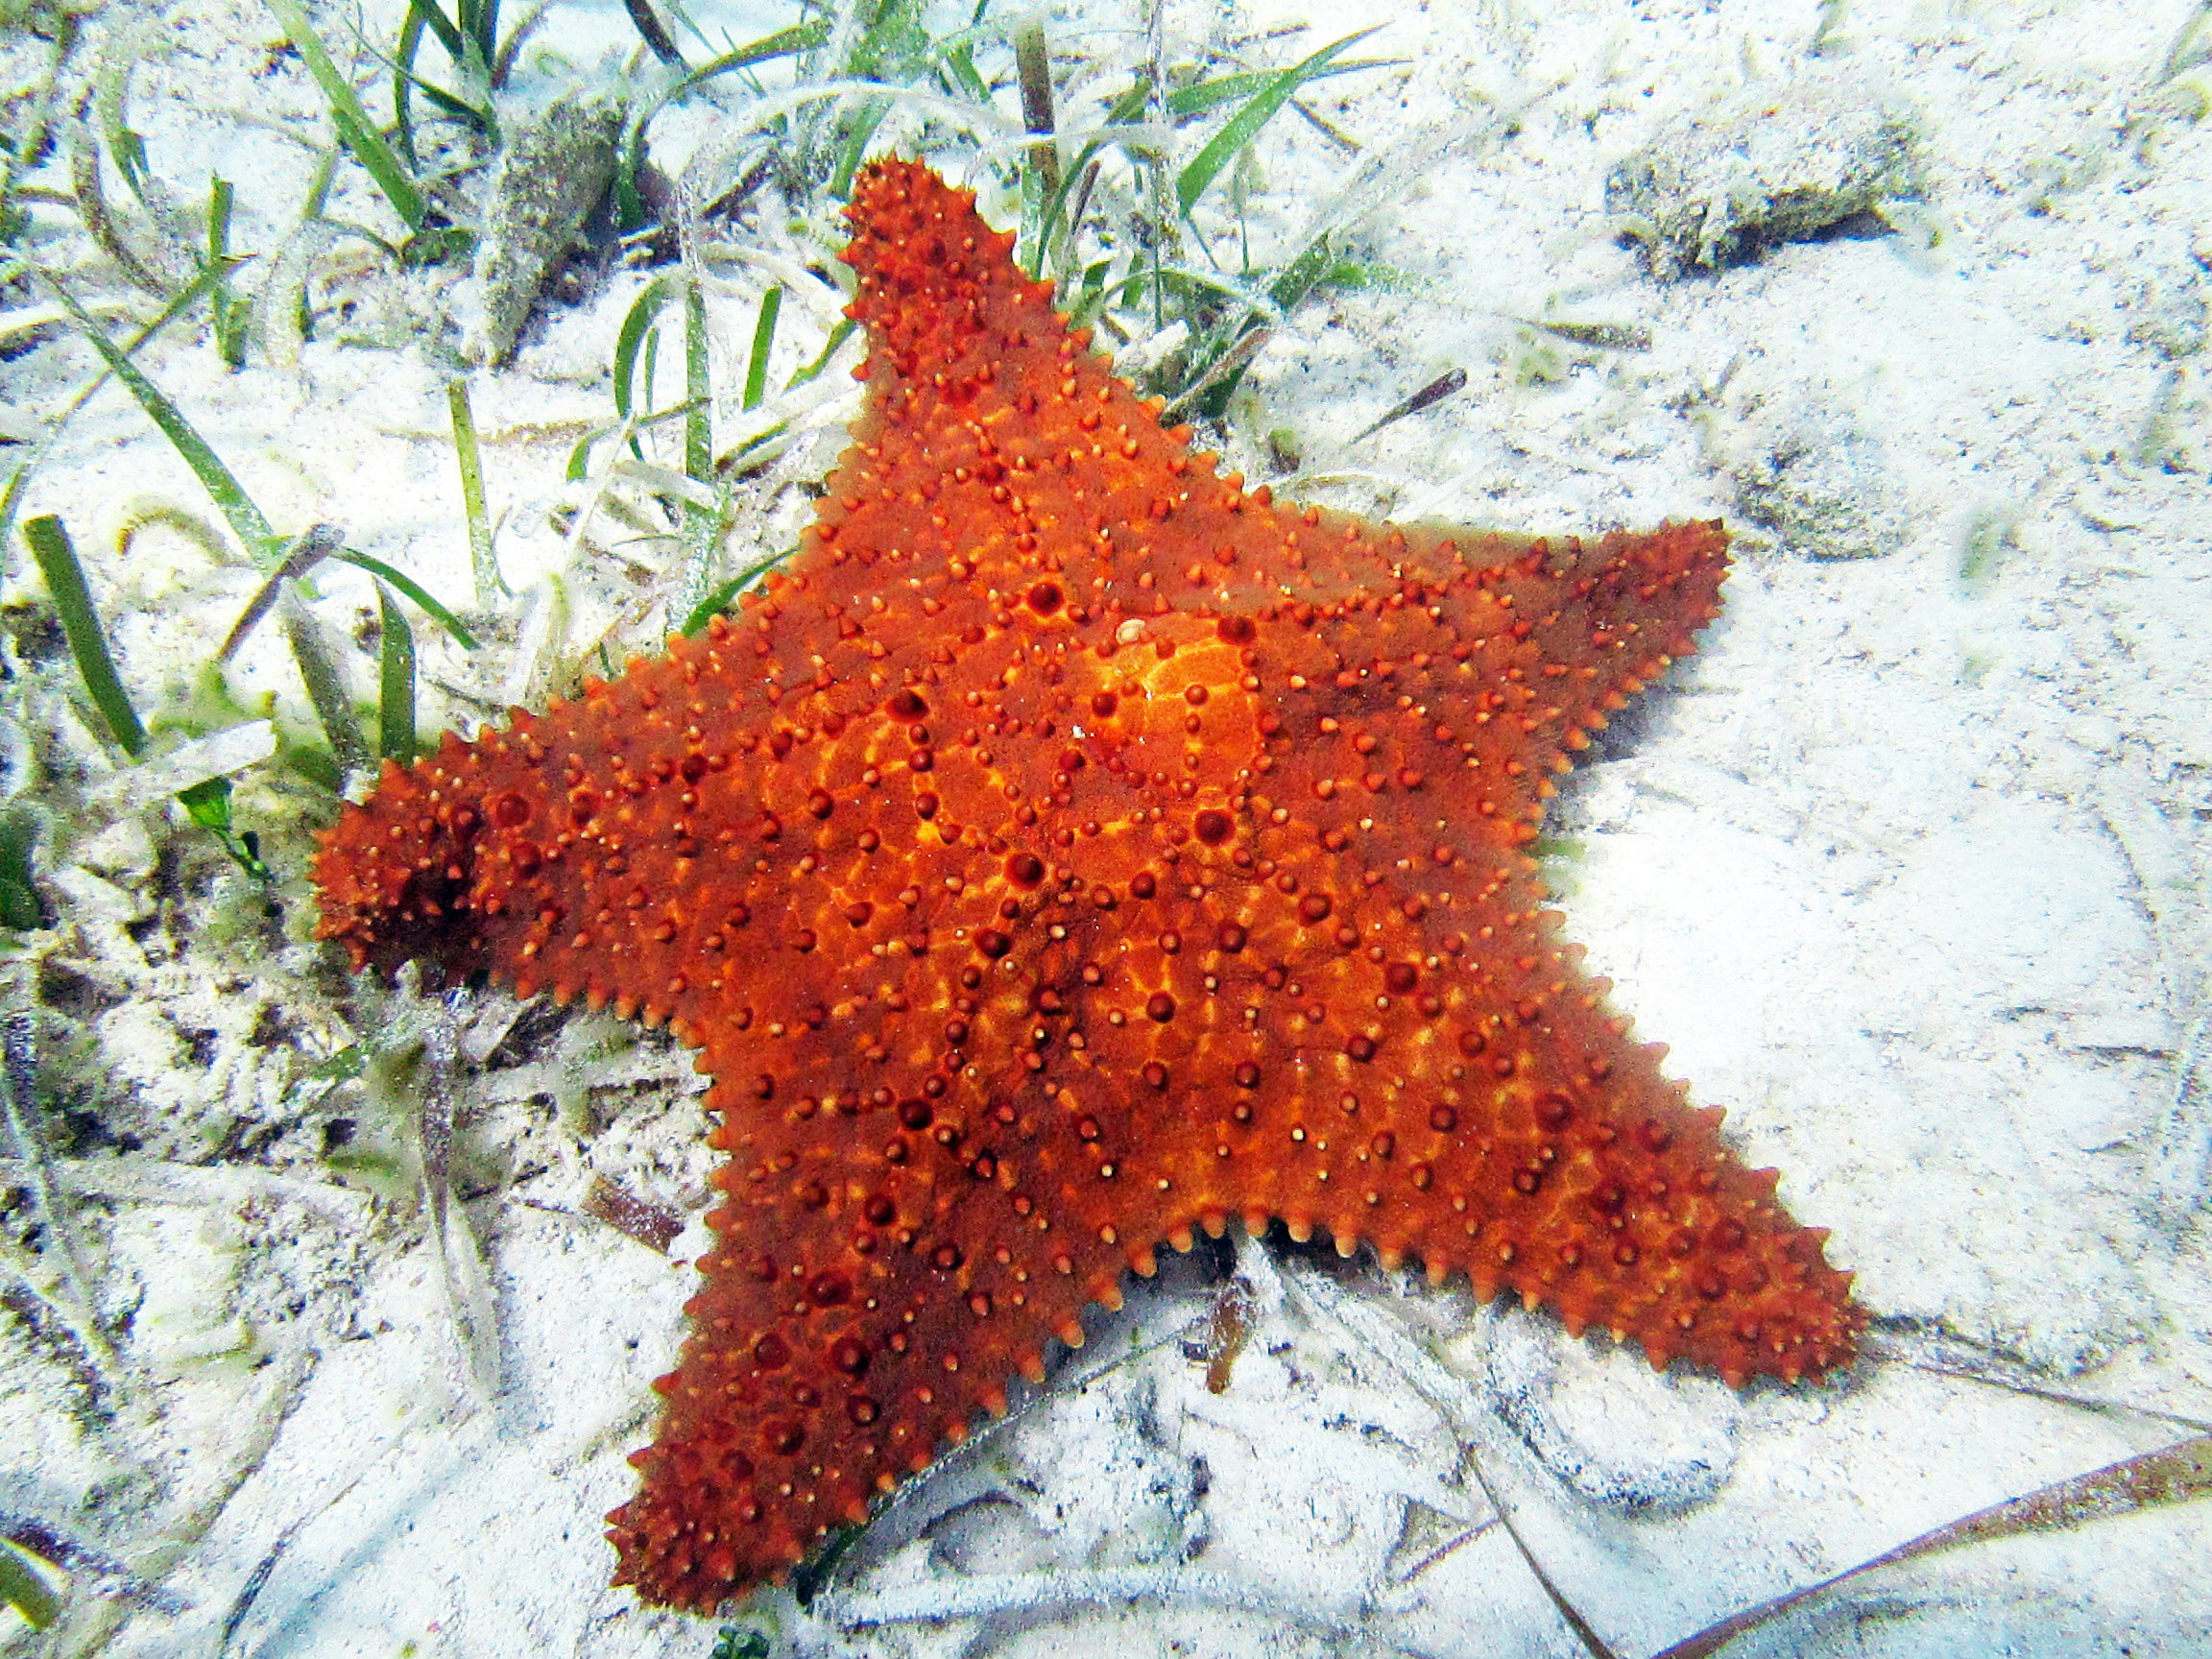 Red cushion sea star on a sandy seabed. PC: James St. John